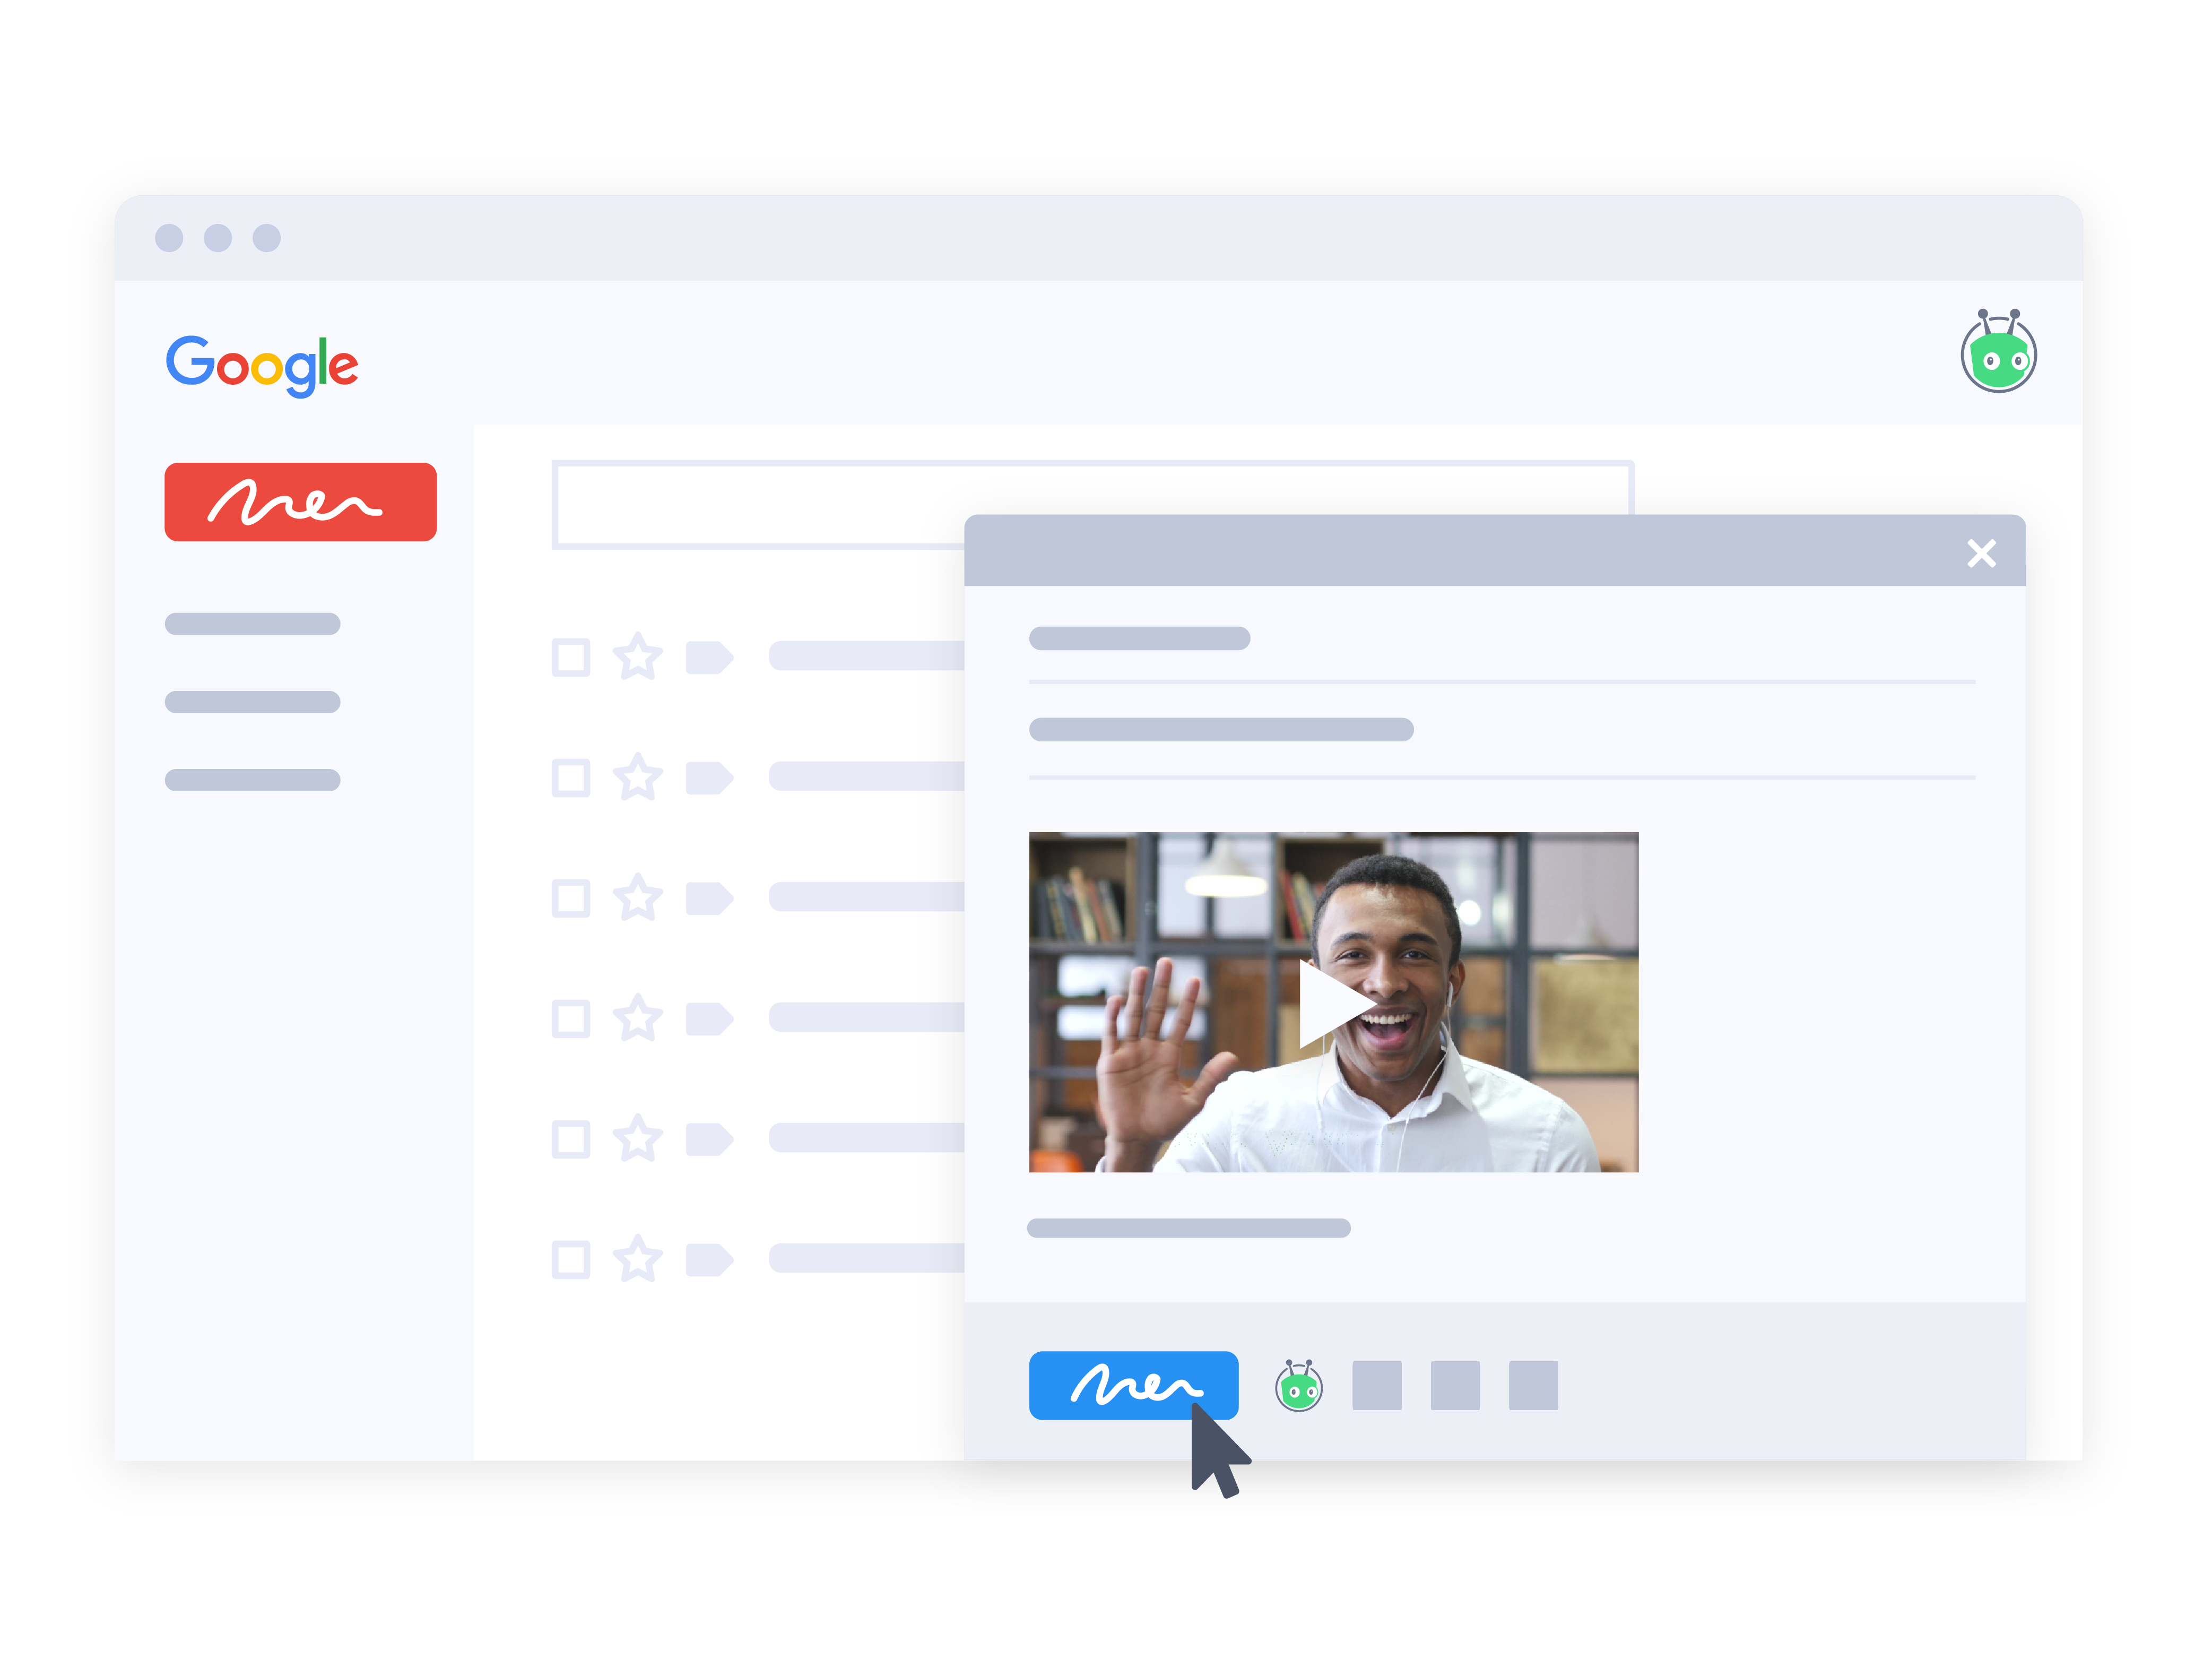 Virtual selling made easy by attaching videos for sales to messages right inside your email client.